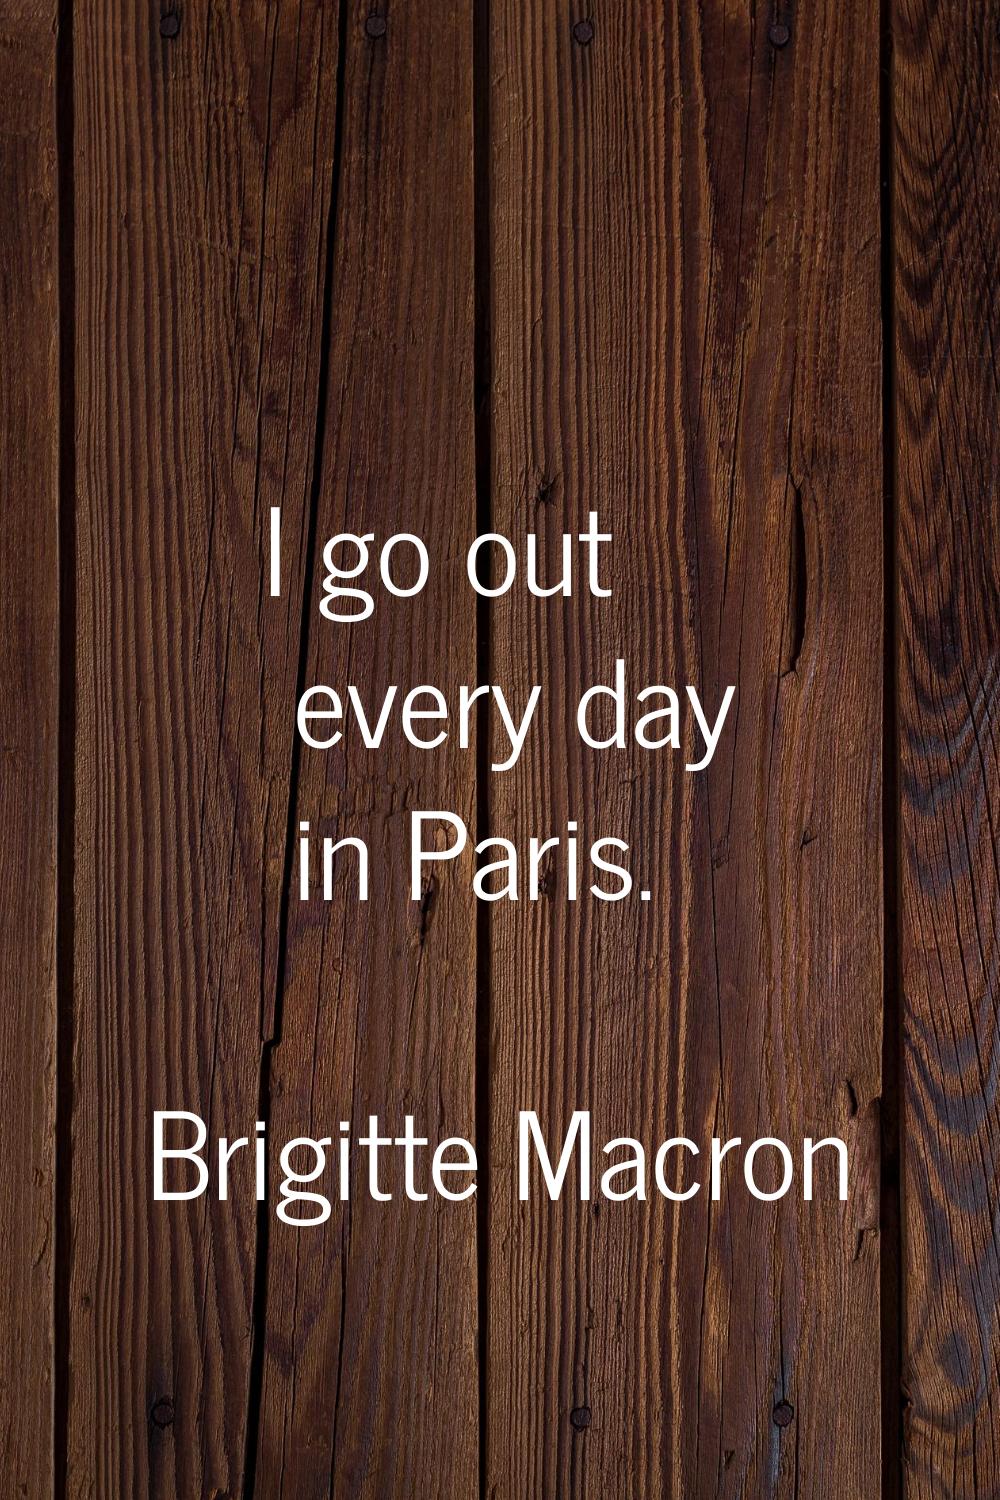 I go out every day in Paris.